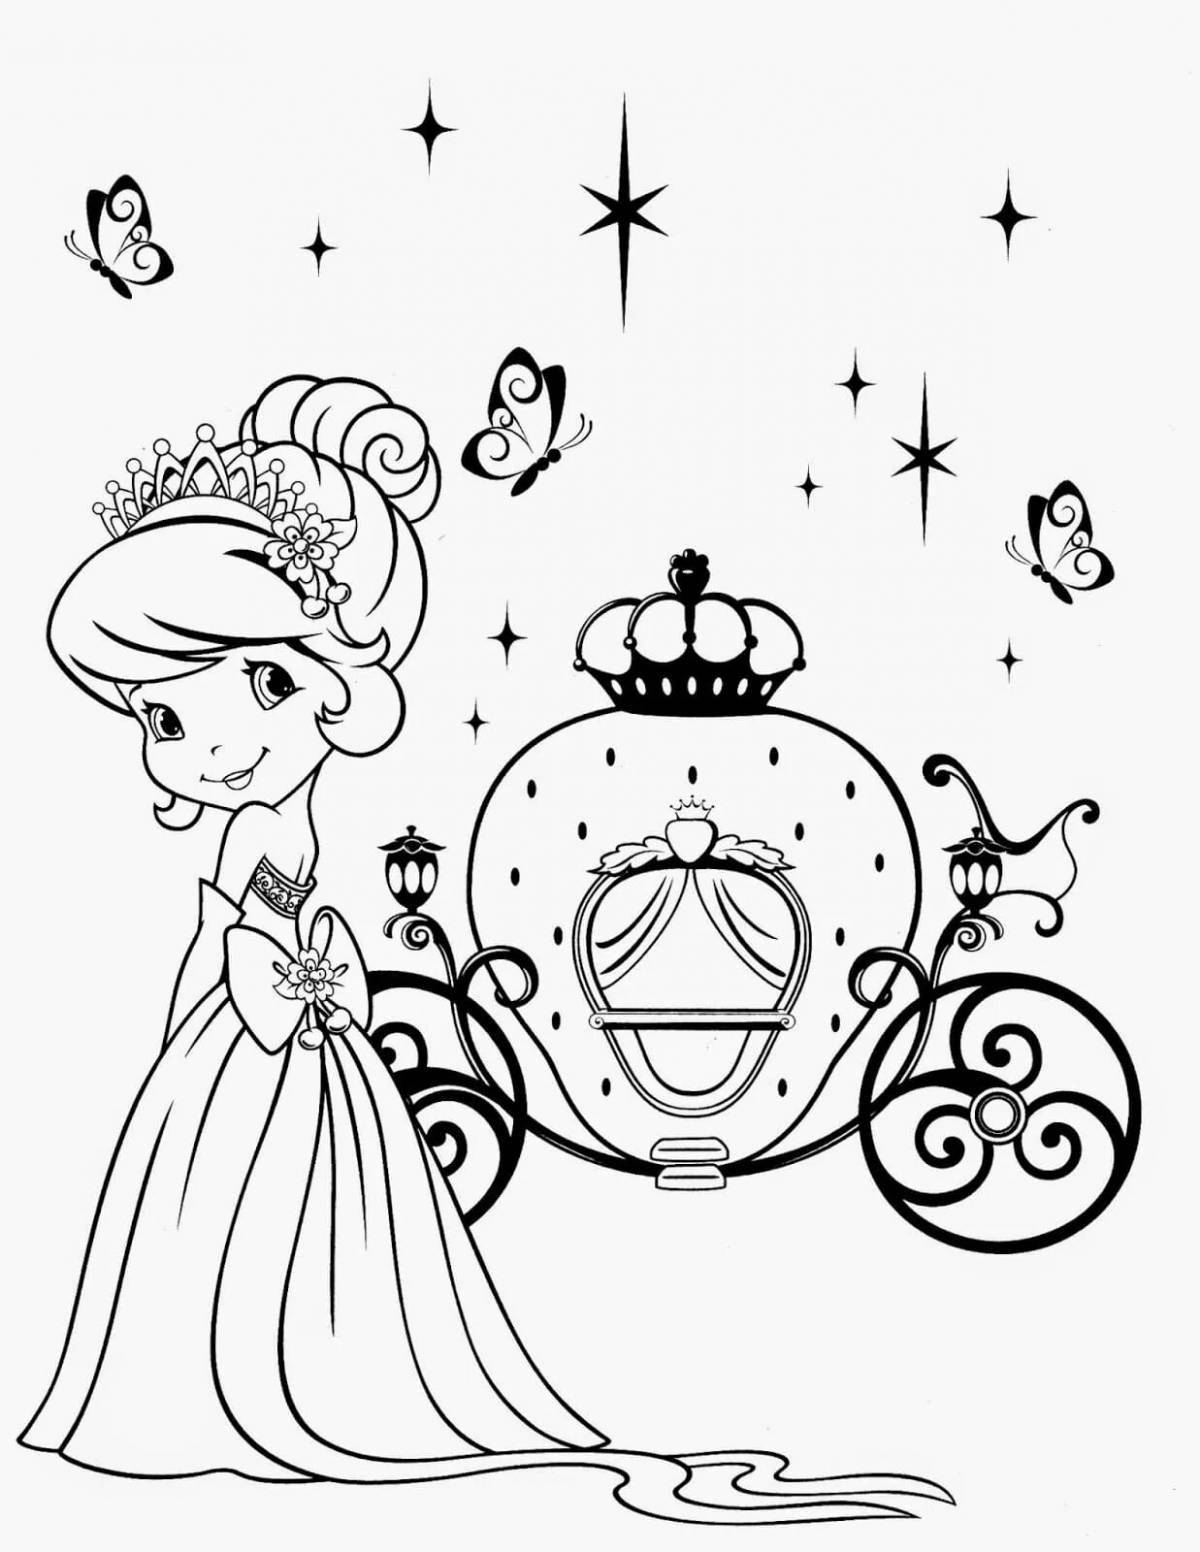 Coloring page the great princess in the carriage